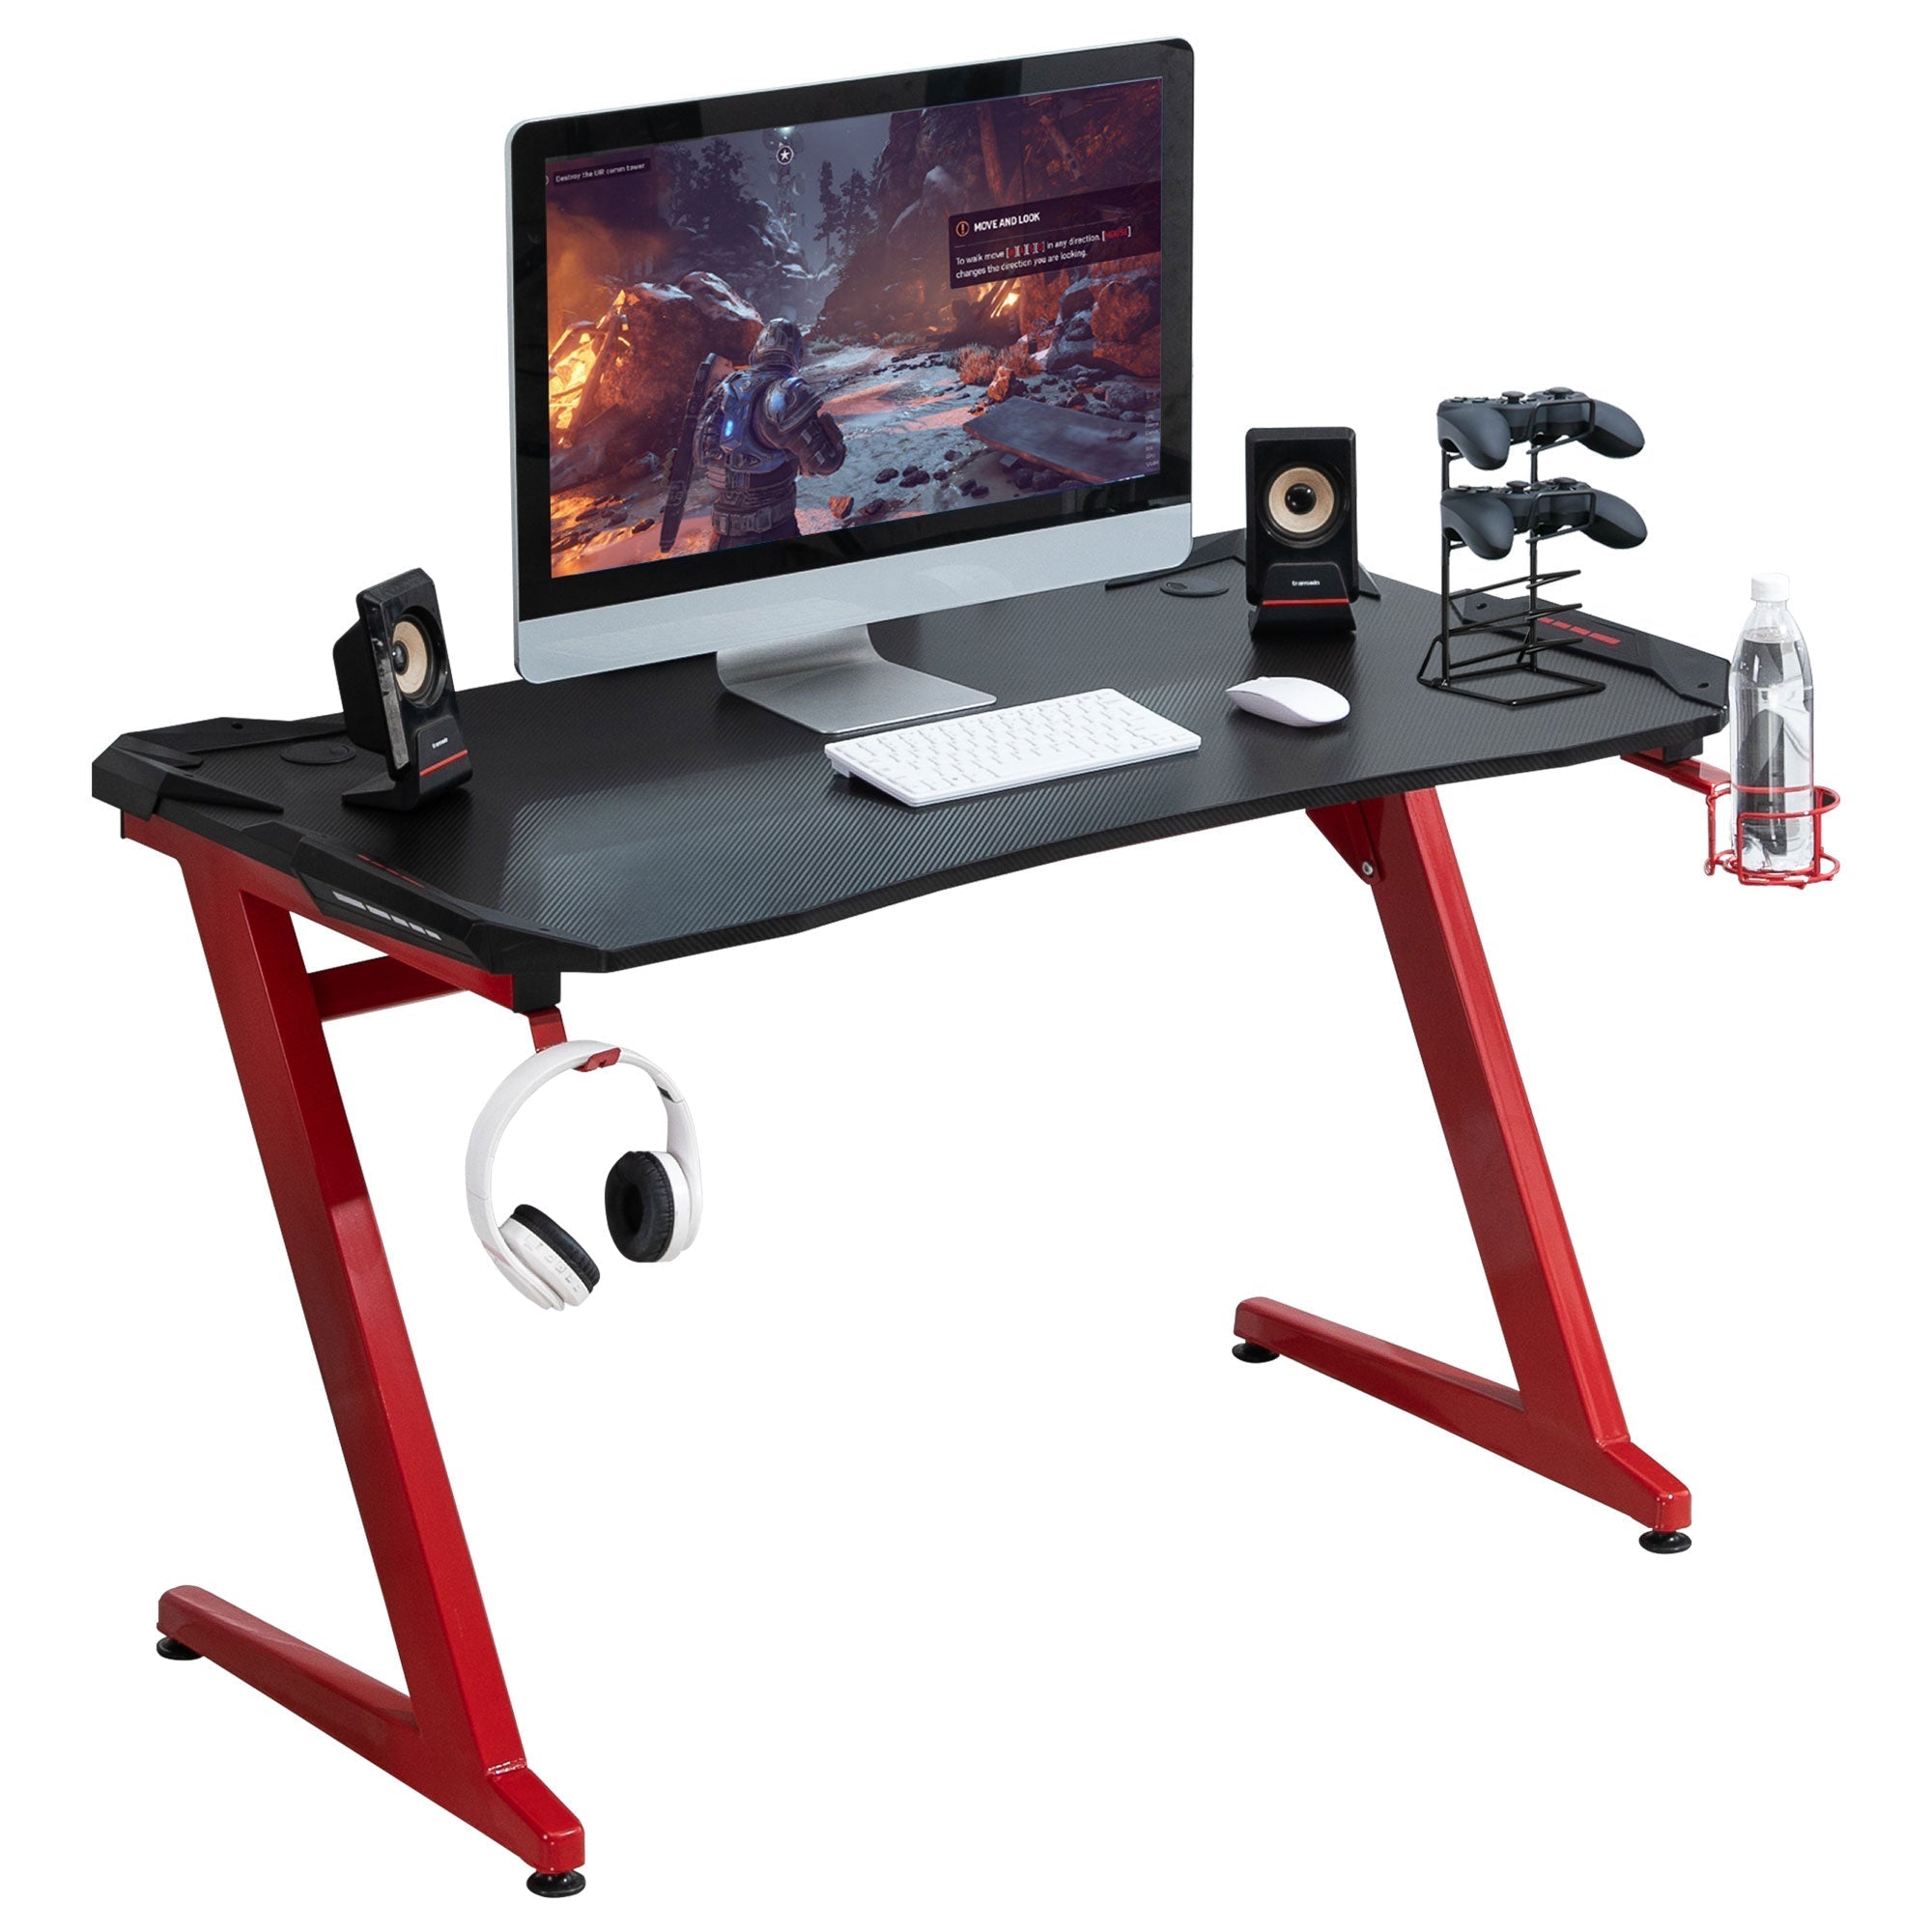 Maplin Plus Gaming Desk with Cup Holder, Headphone Hook & Cable Management - maplin.co.uk